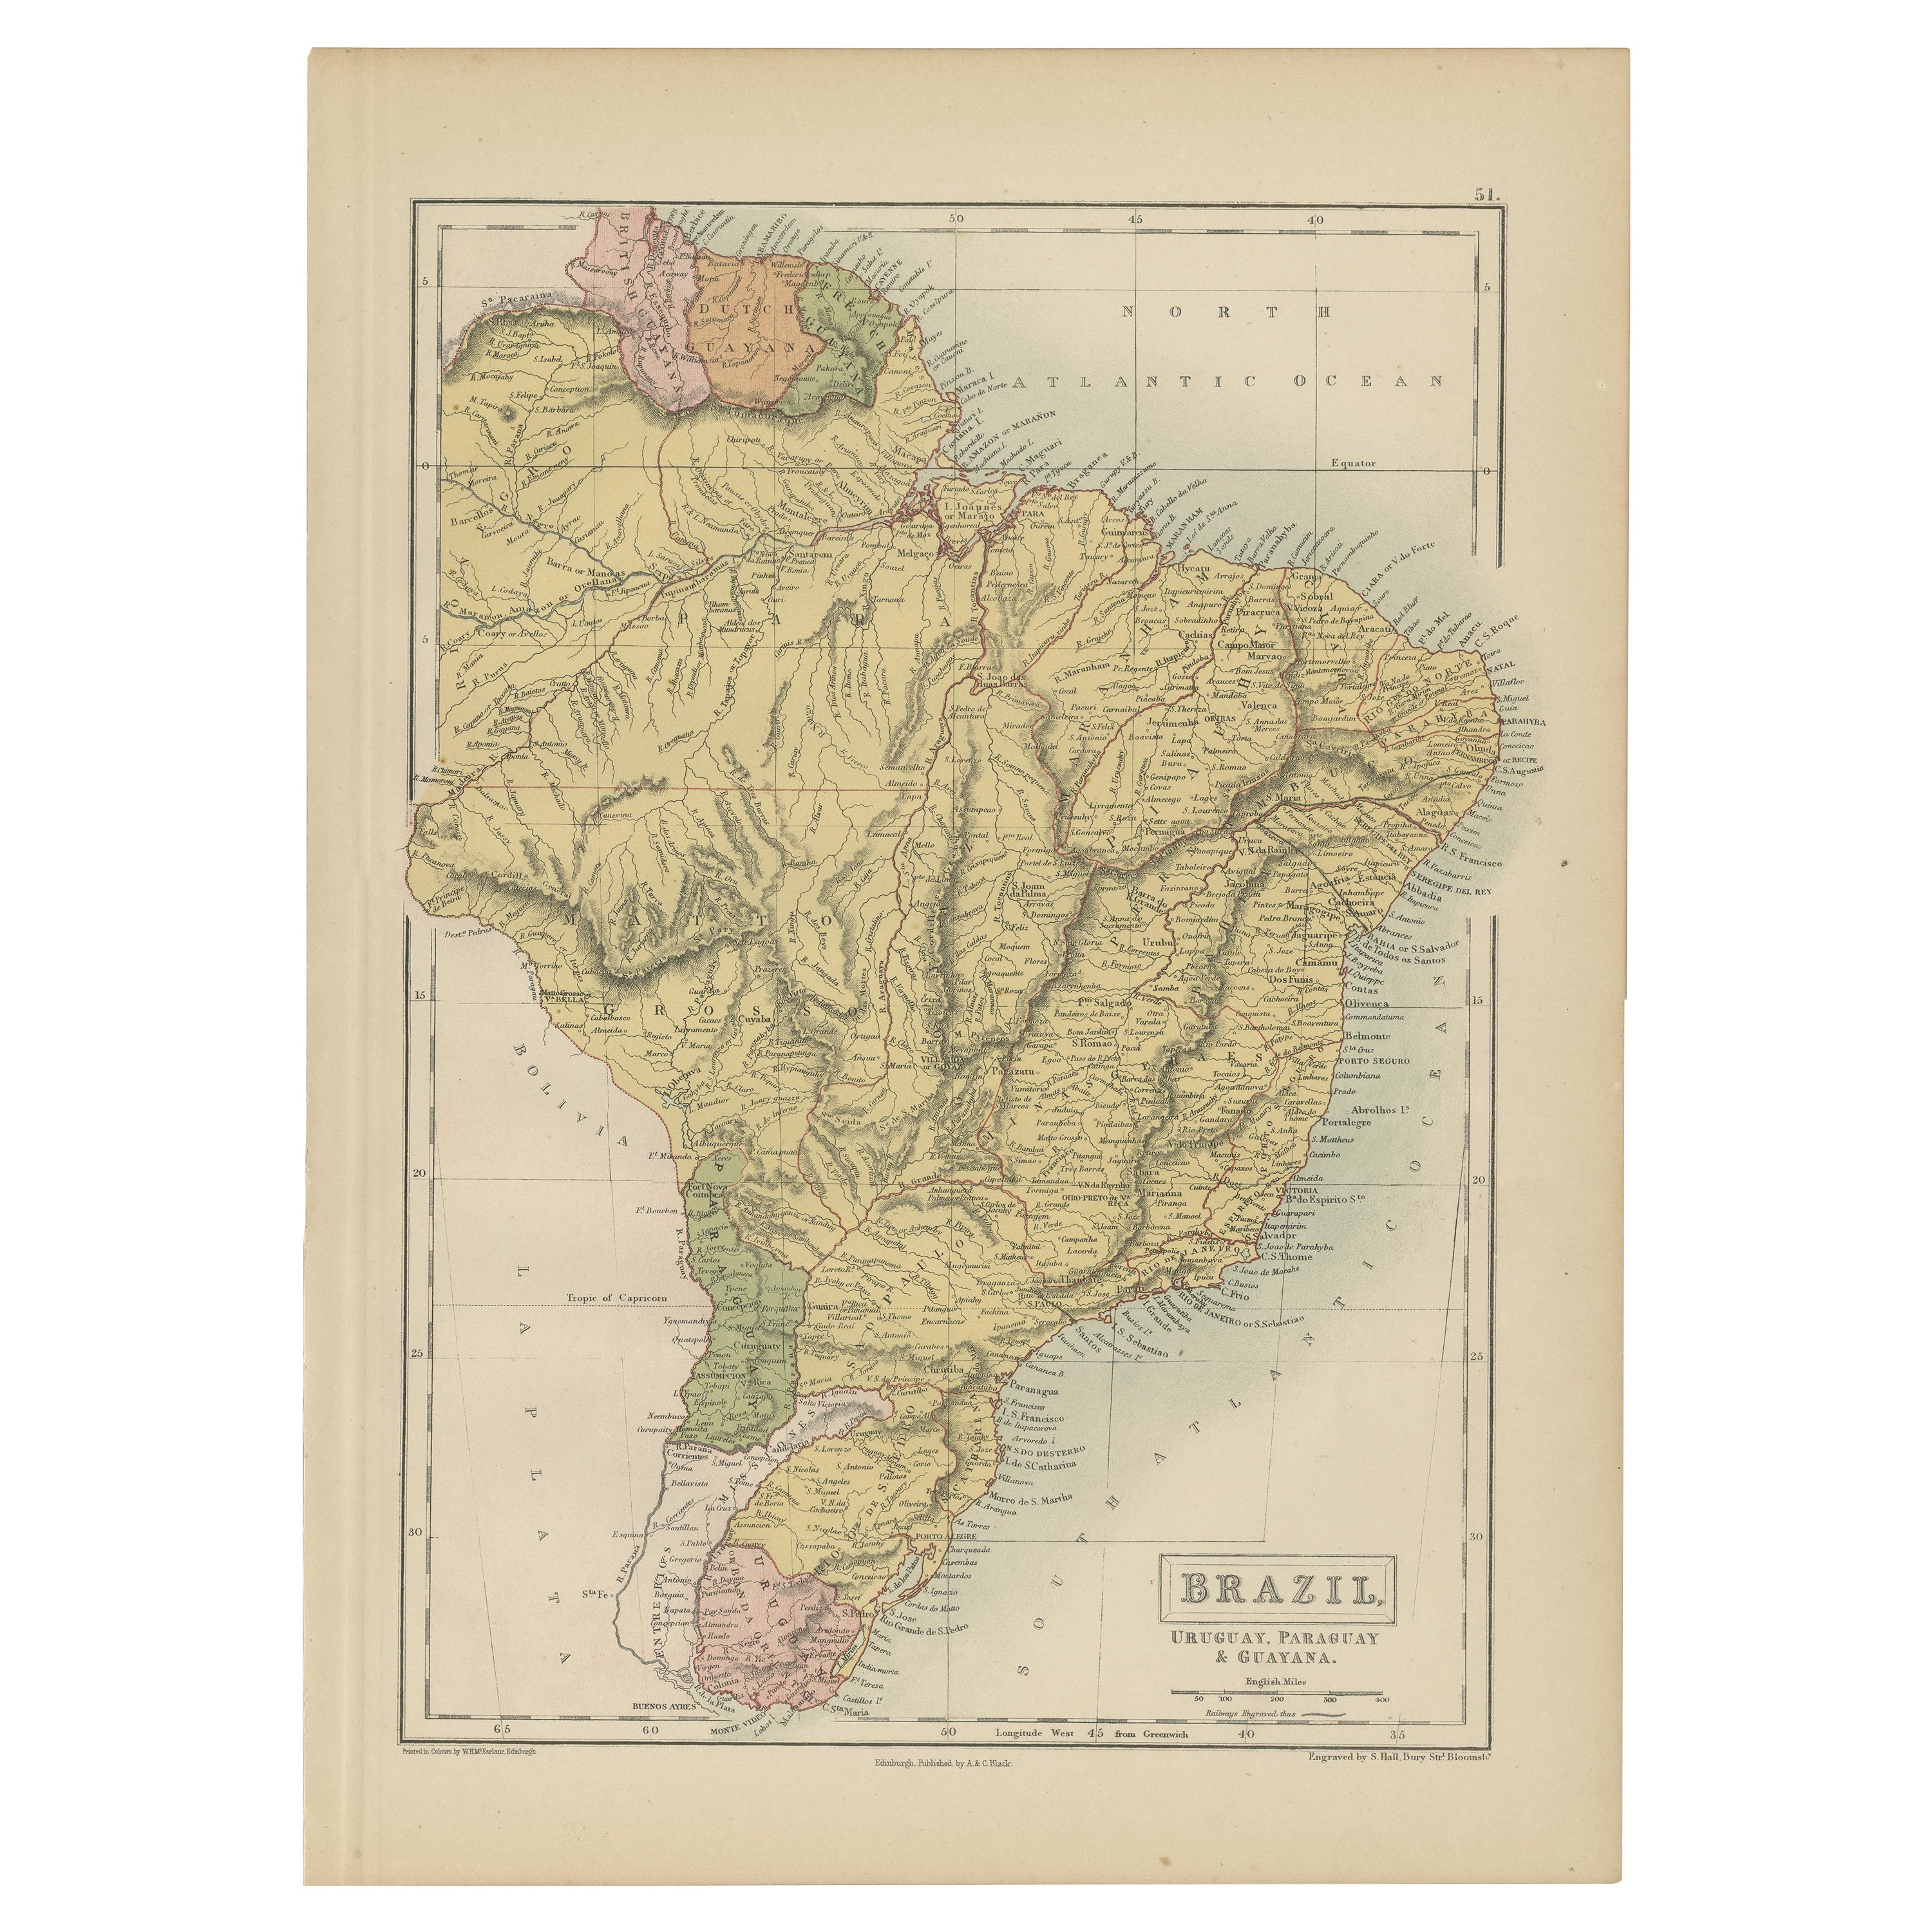 Antique Map of Brazil, Uruguay, Paraguay and Guyana by A & C. Black, 1870